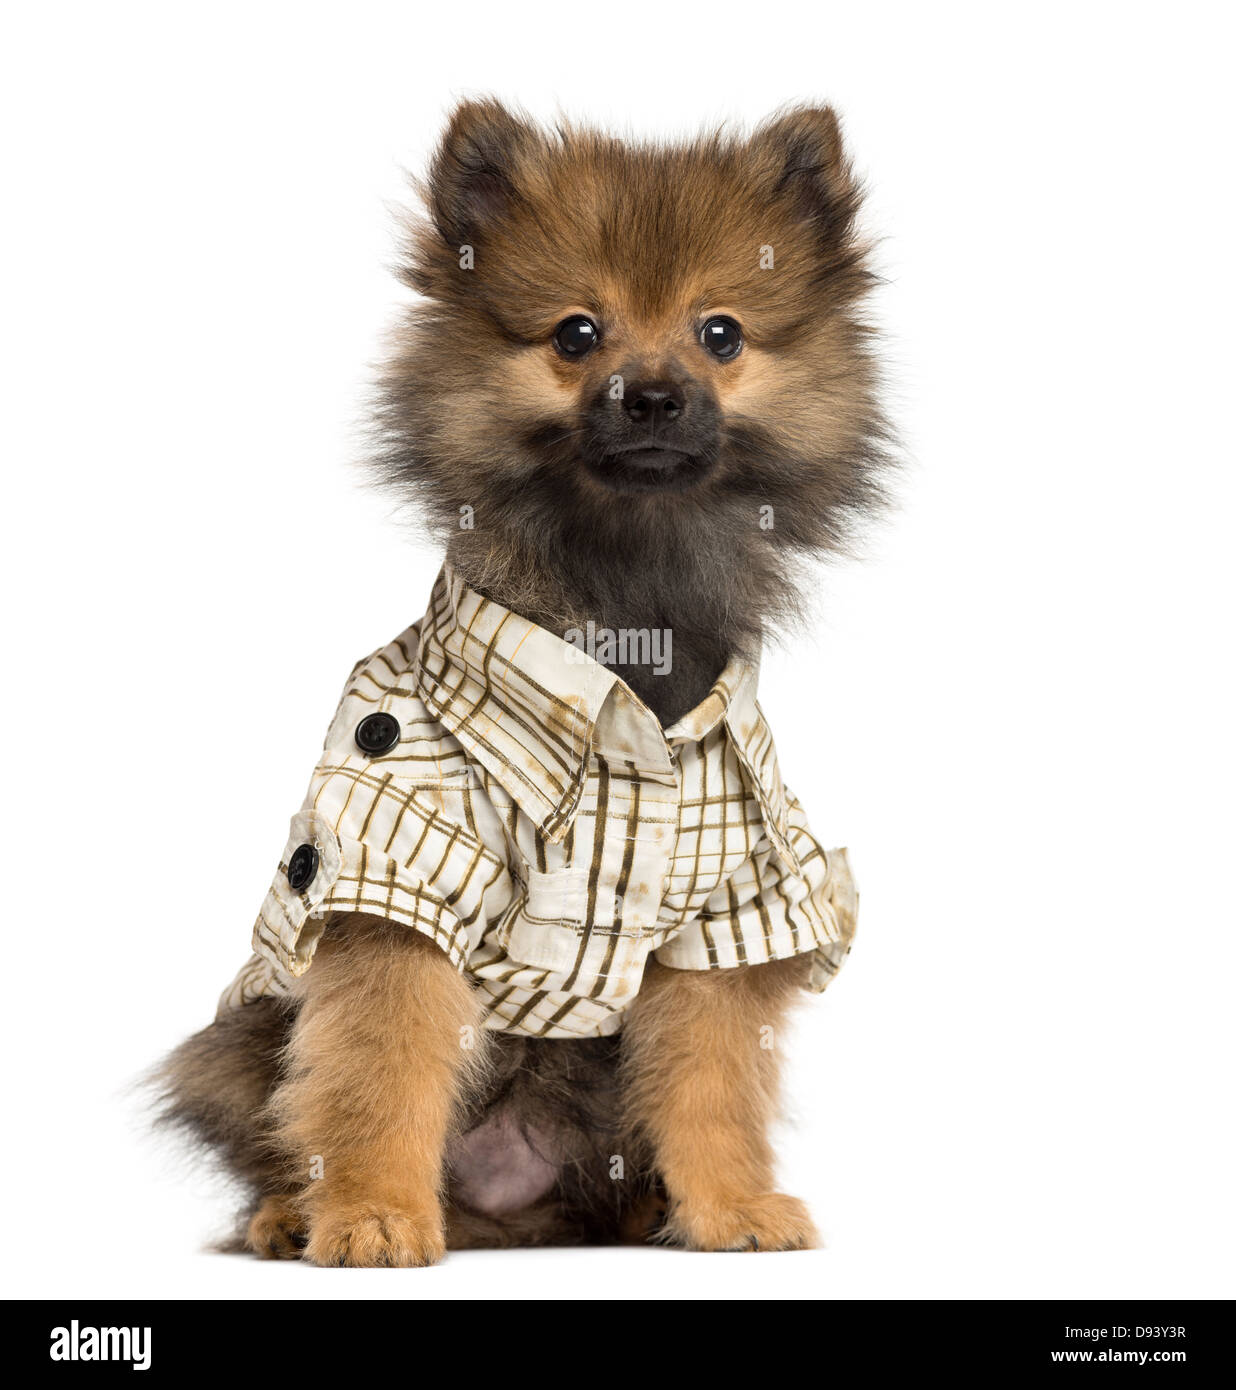 Spitz puppy wearing a checked shirt, 4 months old, against white background Stock Photo